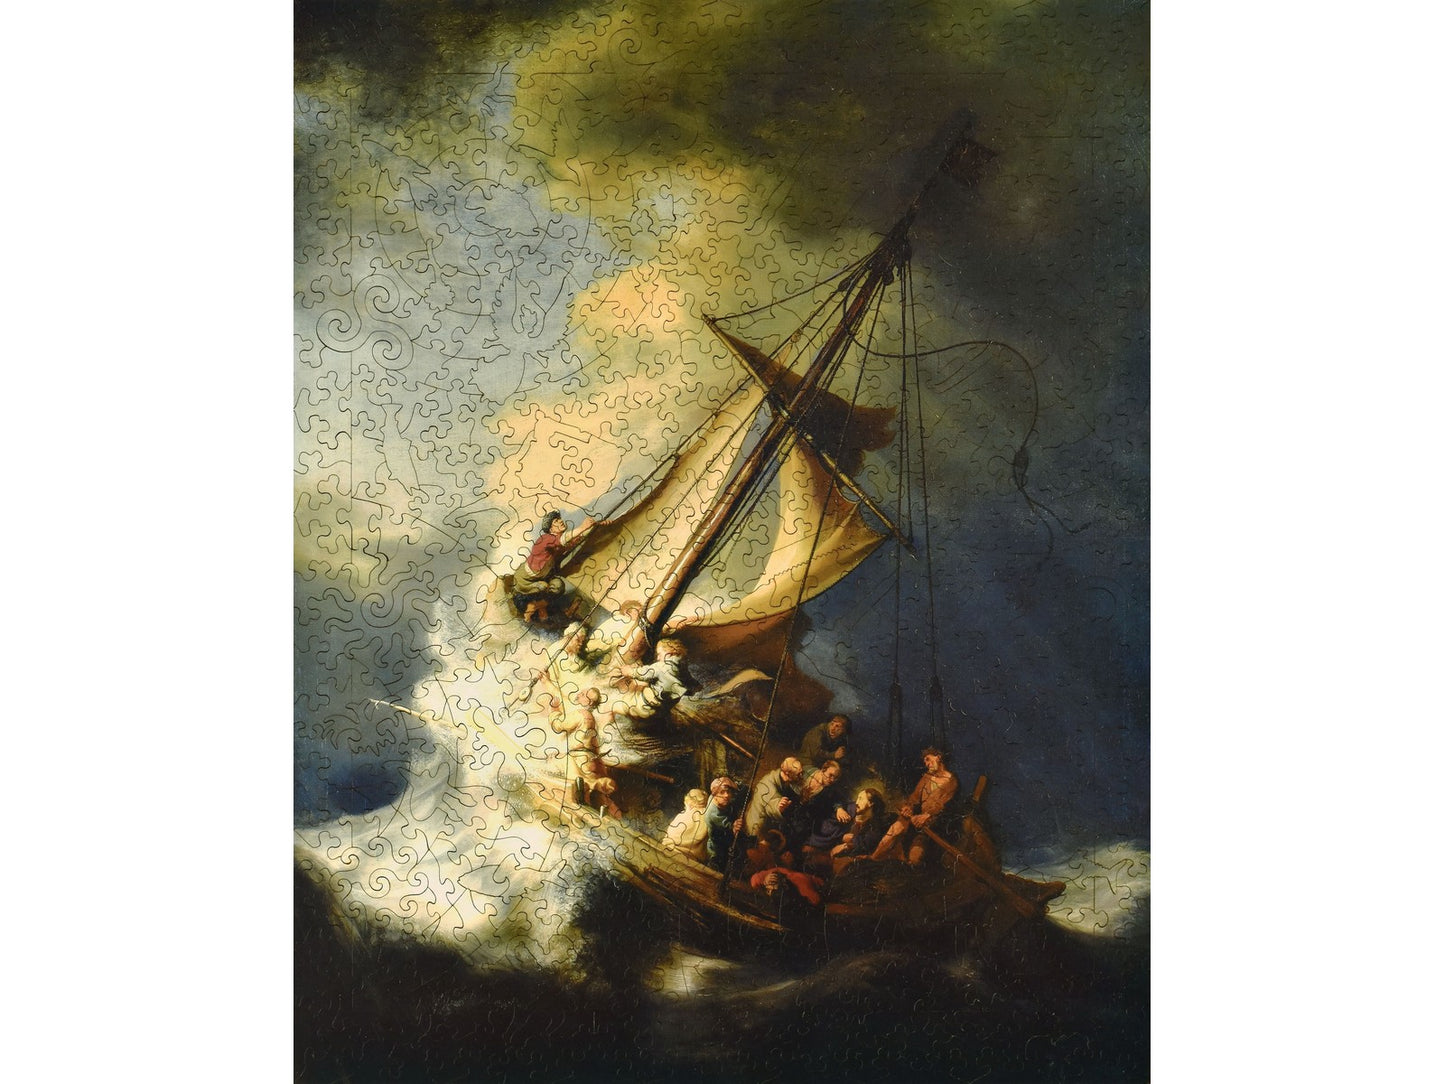 The front of the puzzle, Storm on the Sea of Galilee, which shows a boat of people on a stormy ocean.